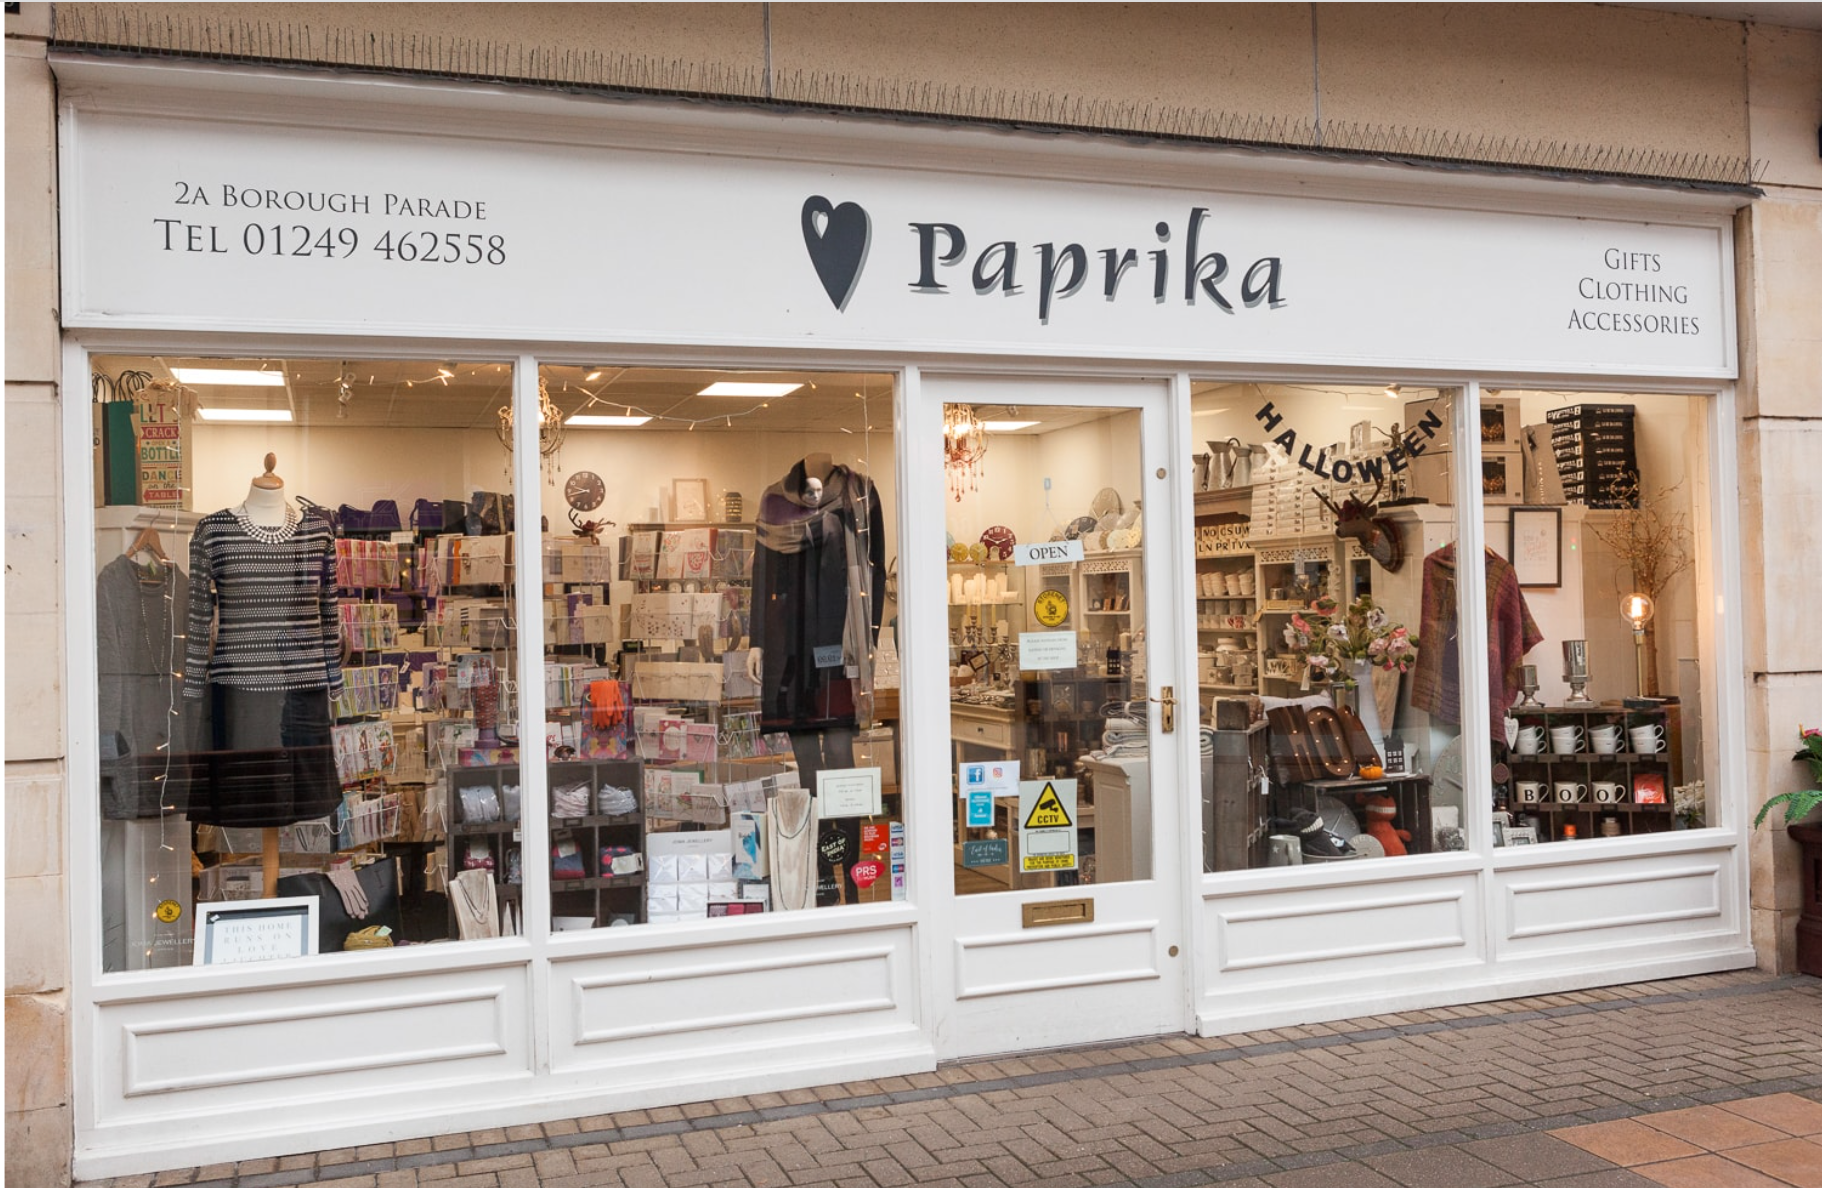 Above: Paprika is encouraging its customers to buy early!